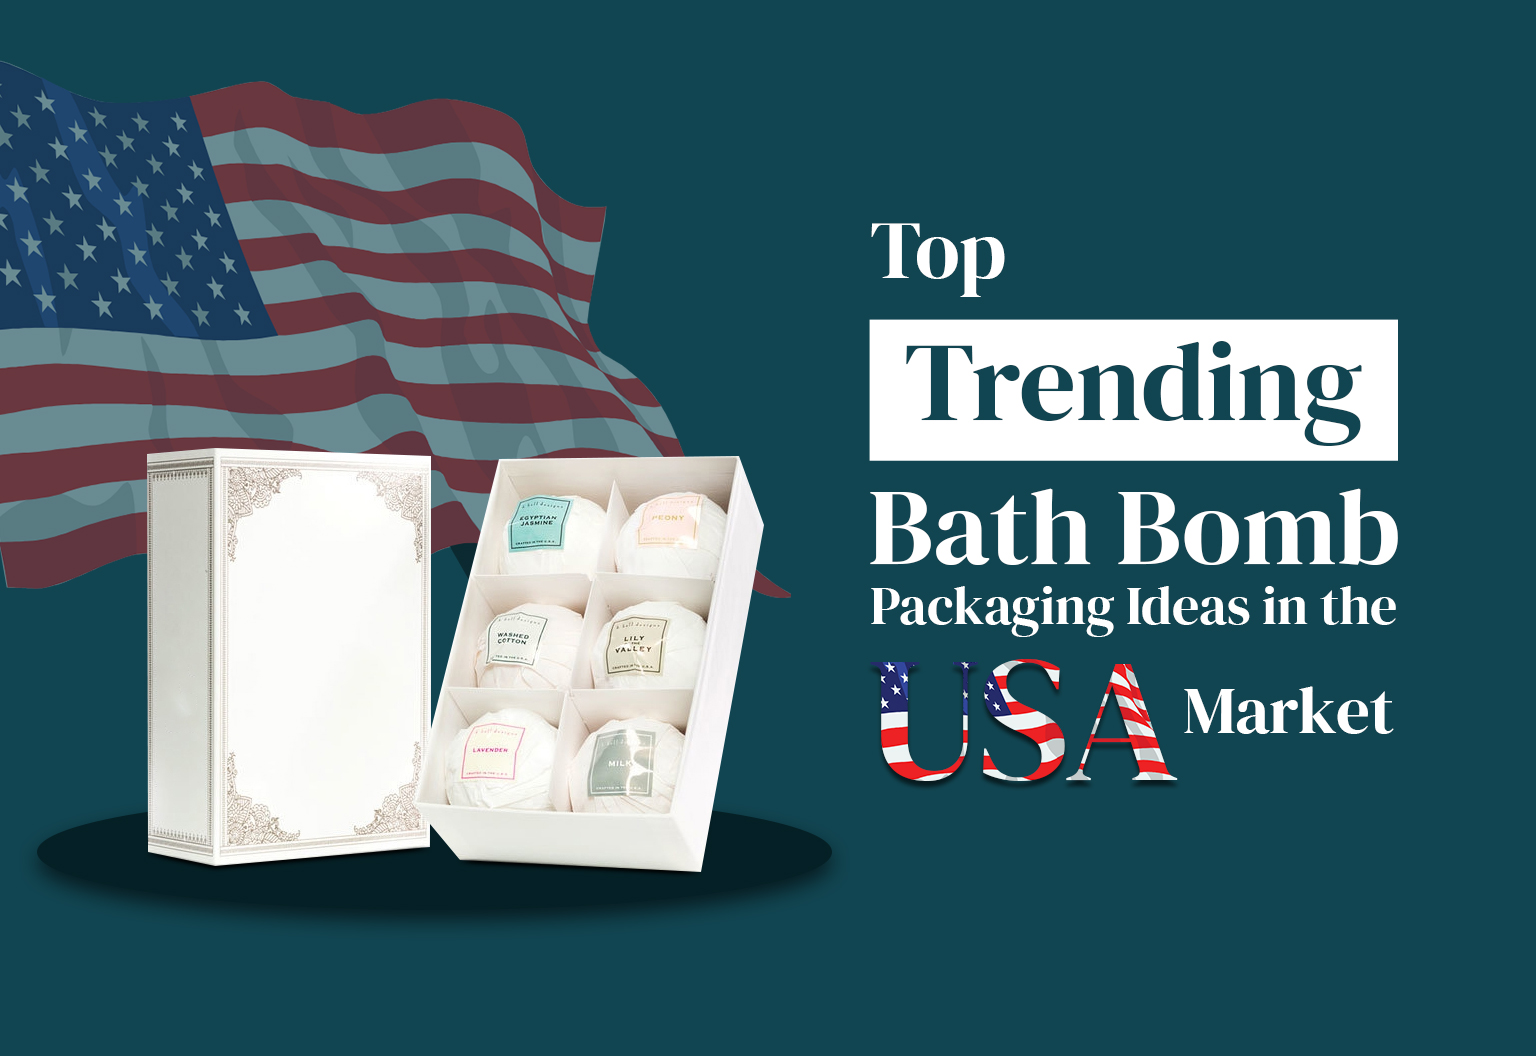 Top Trending Bath Bomb Packaging Ideas in the USA Market